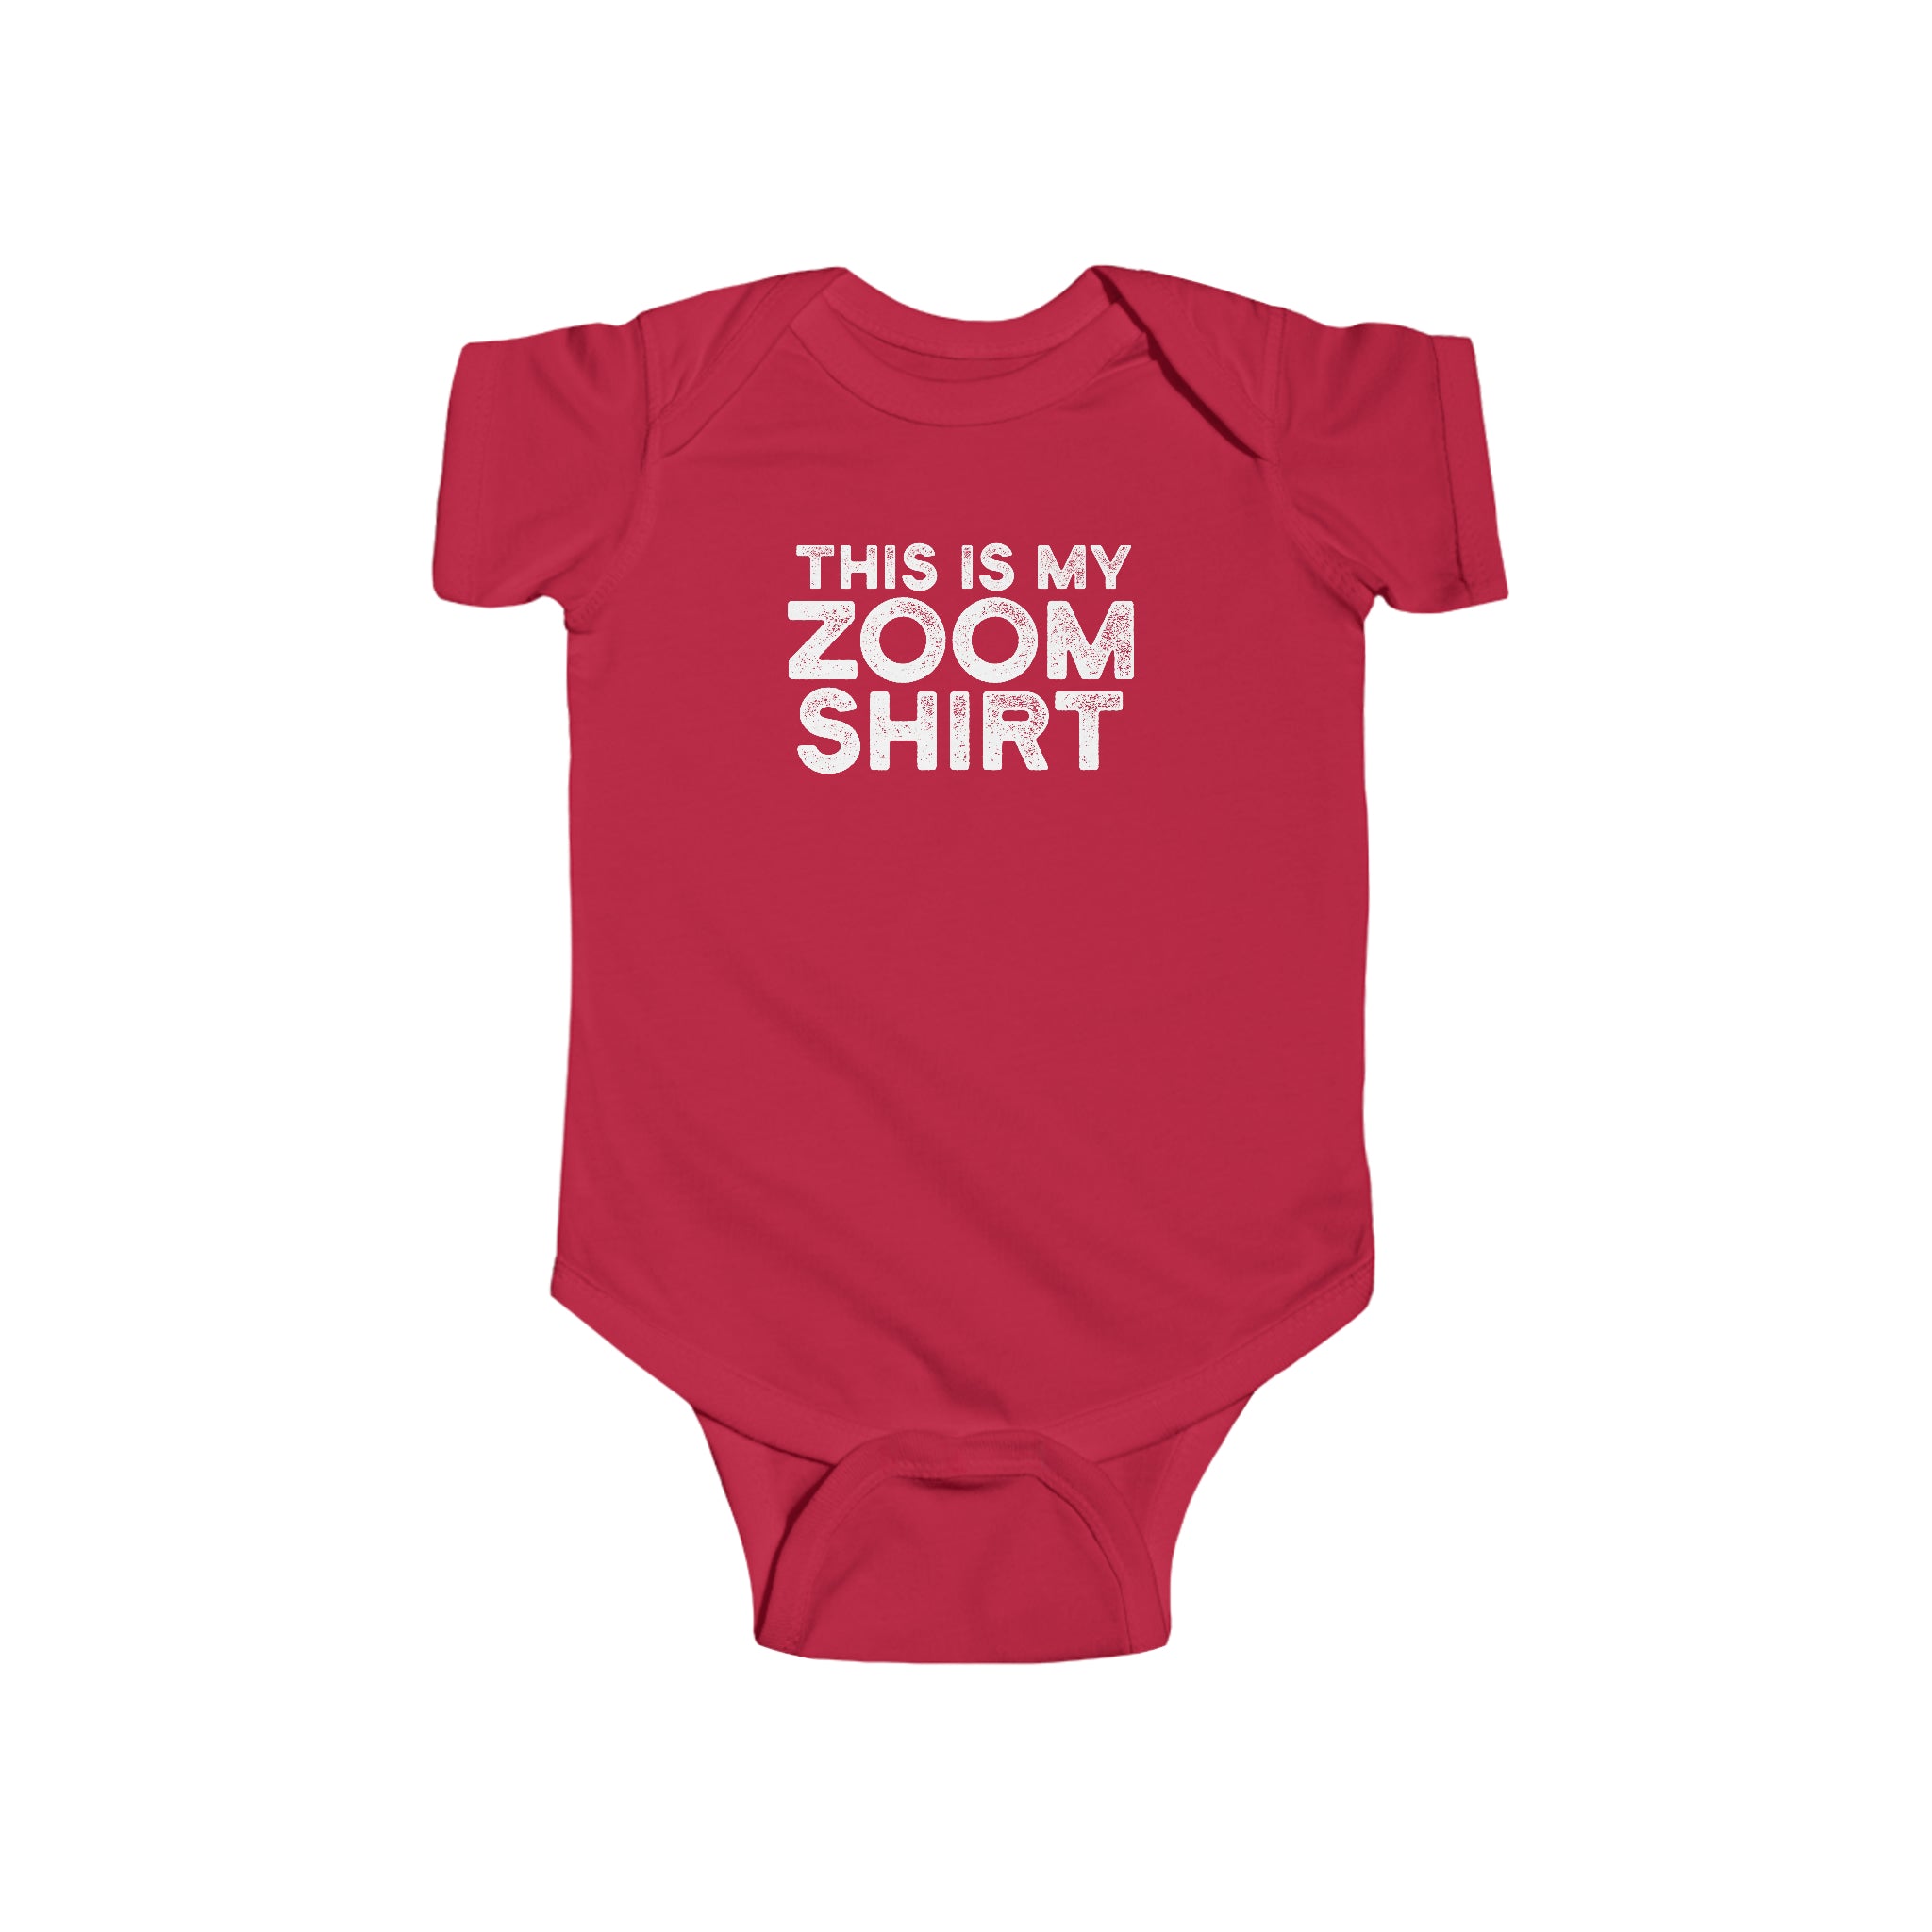 This Is My Zoom Shirt Onesie